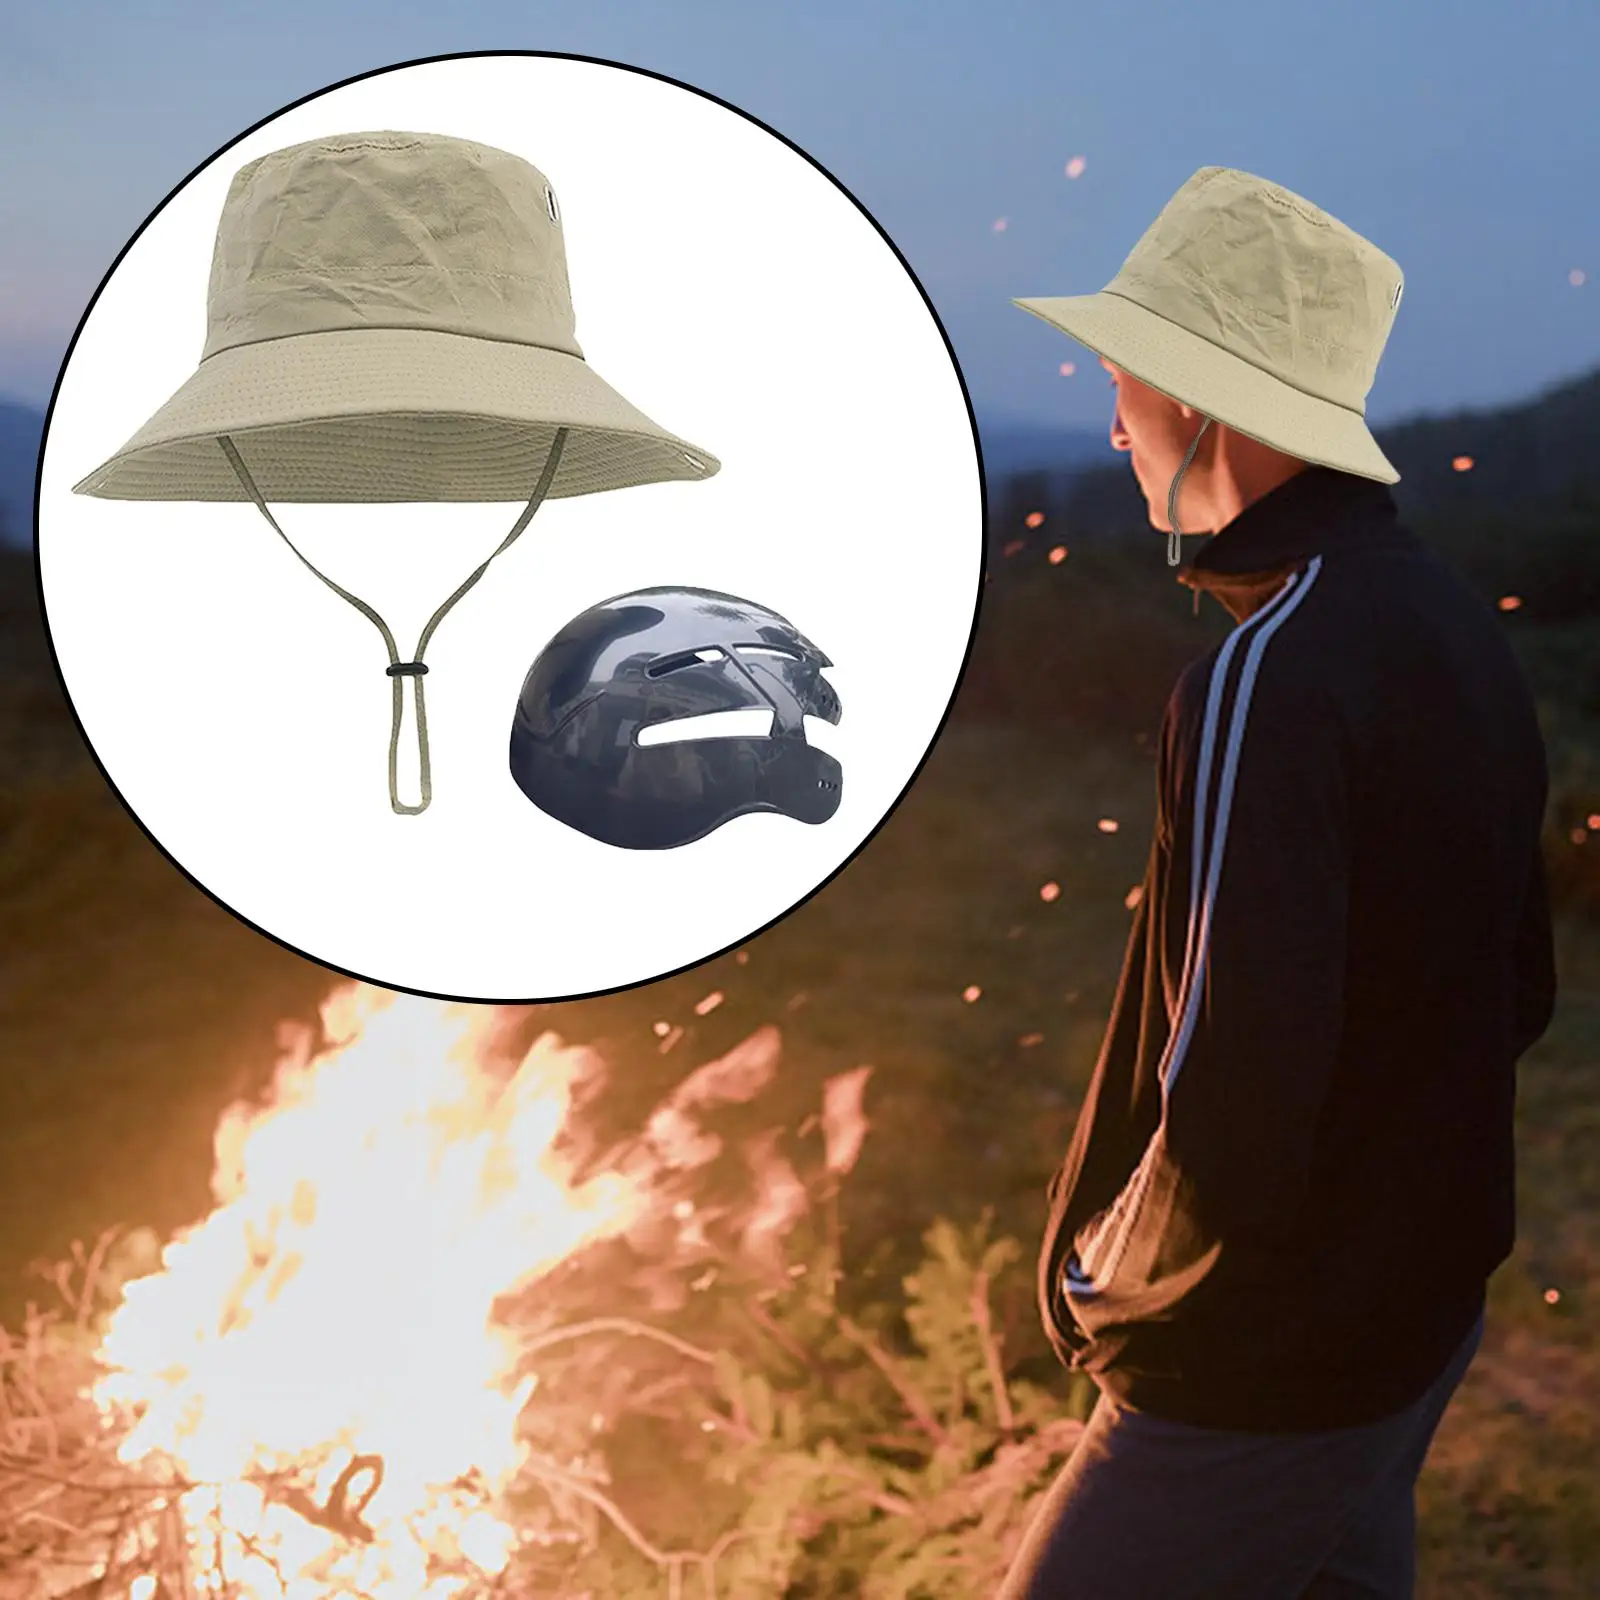 https://ae01.alicdn.com/kf/S6d2600335f1e440e82a9ed57f5c506d4N/Bucket-Hat-with-Strings-Foldable-with-Bump-Hat-Insert-Breathable-Sun-Hat-with-Strap-for-Golf.jpg